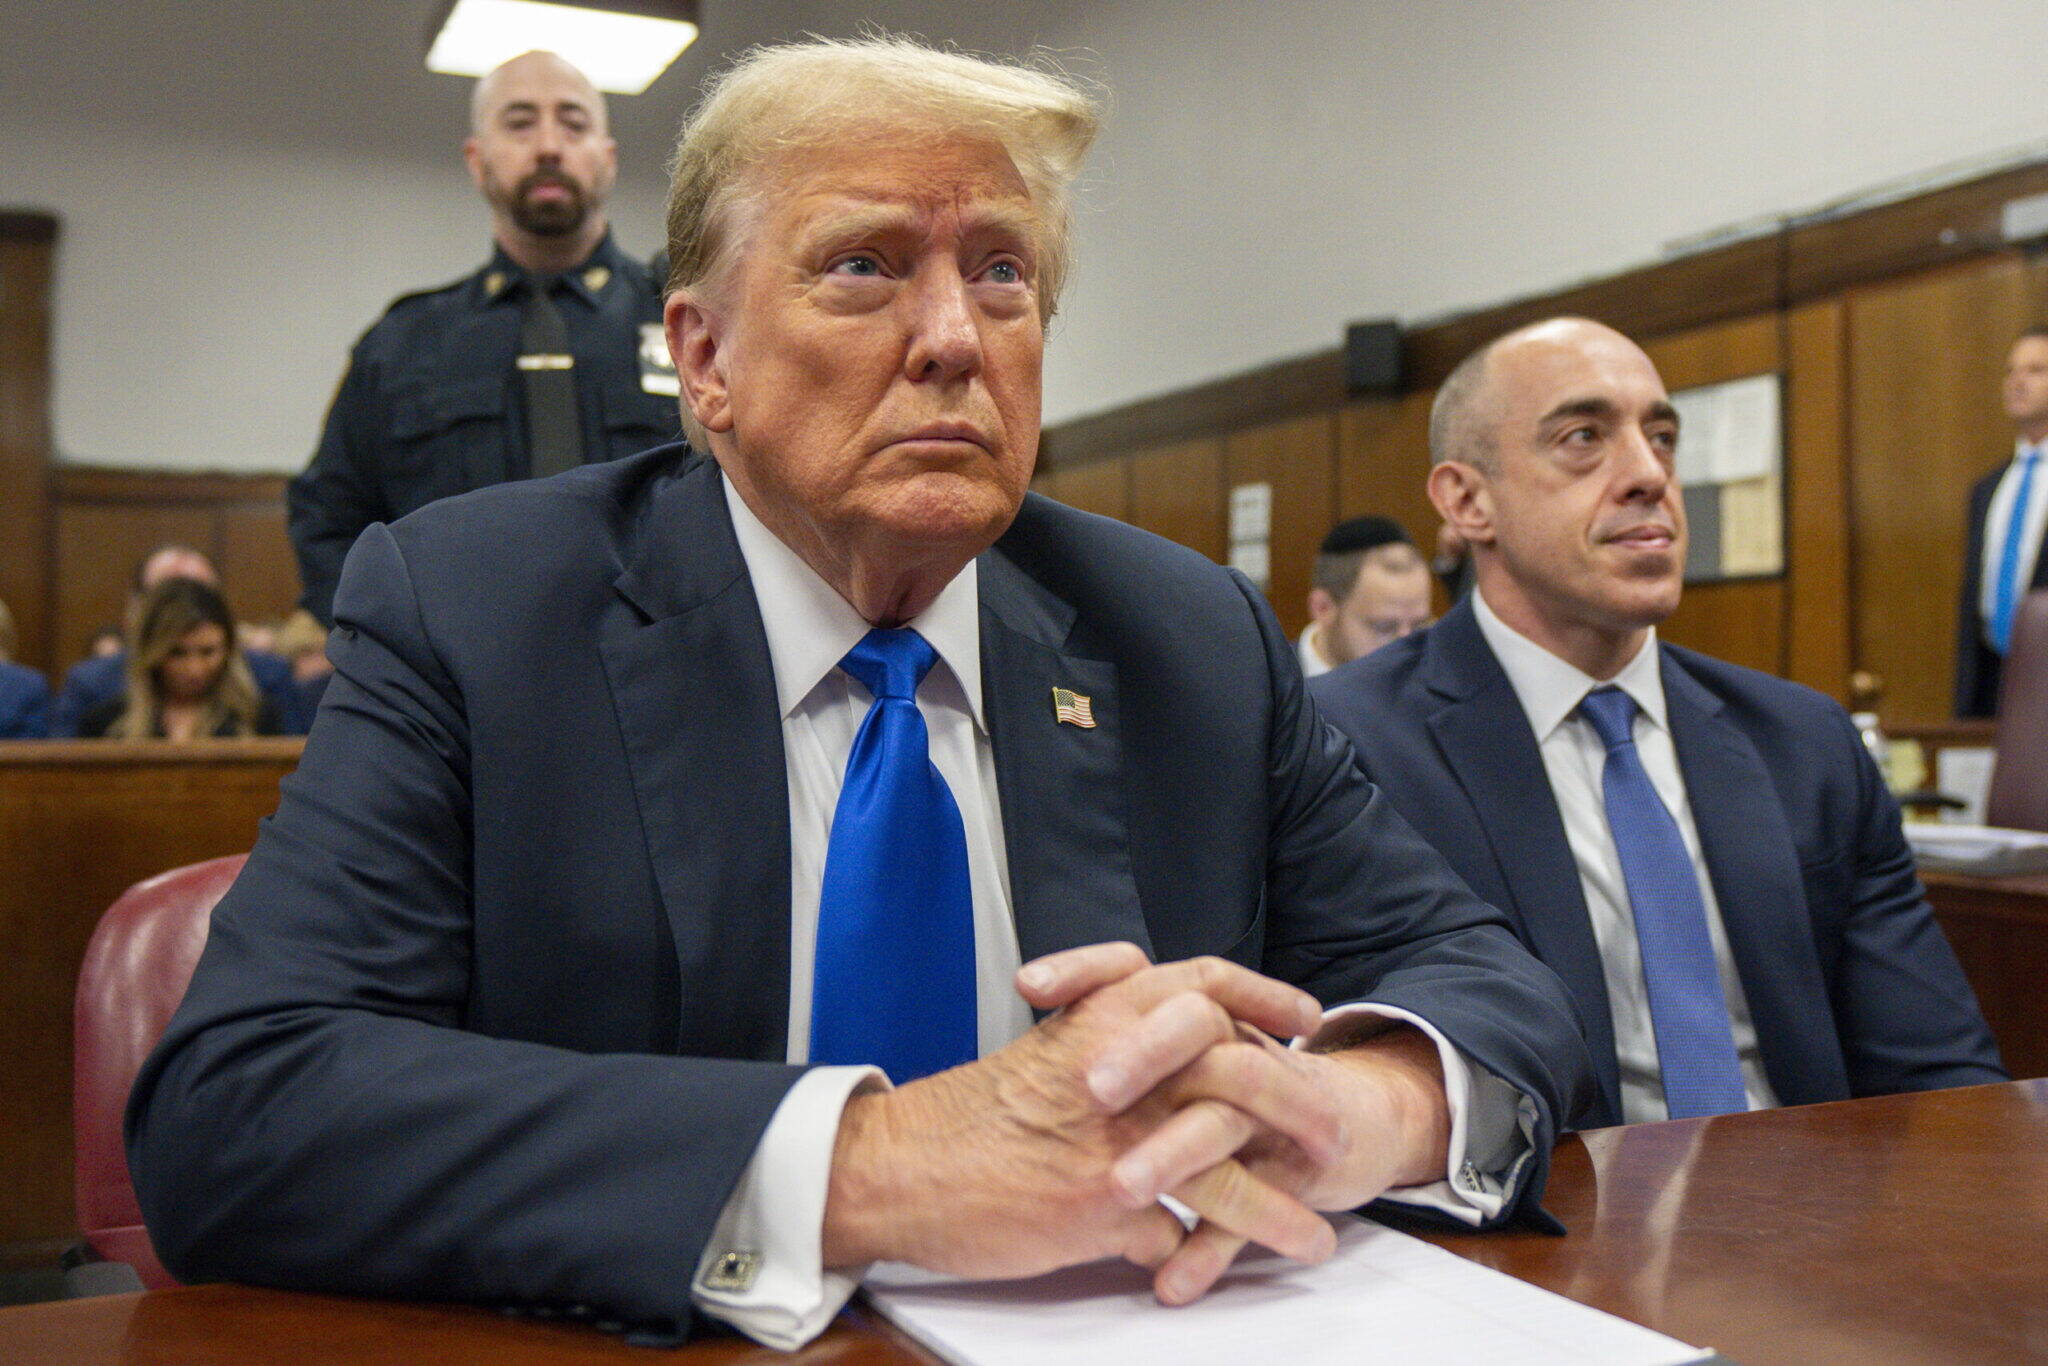 Former U.S. President Donald Trump appears in court for his hush money trial at Manhattan Criminal Court on Thursday in New York City. (Photo by Steven Hirsch-Pool/Getty Images)